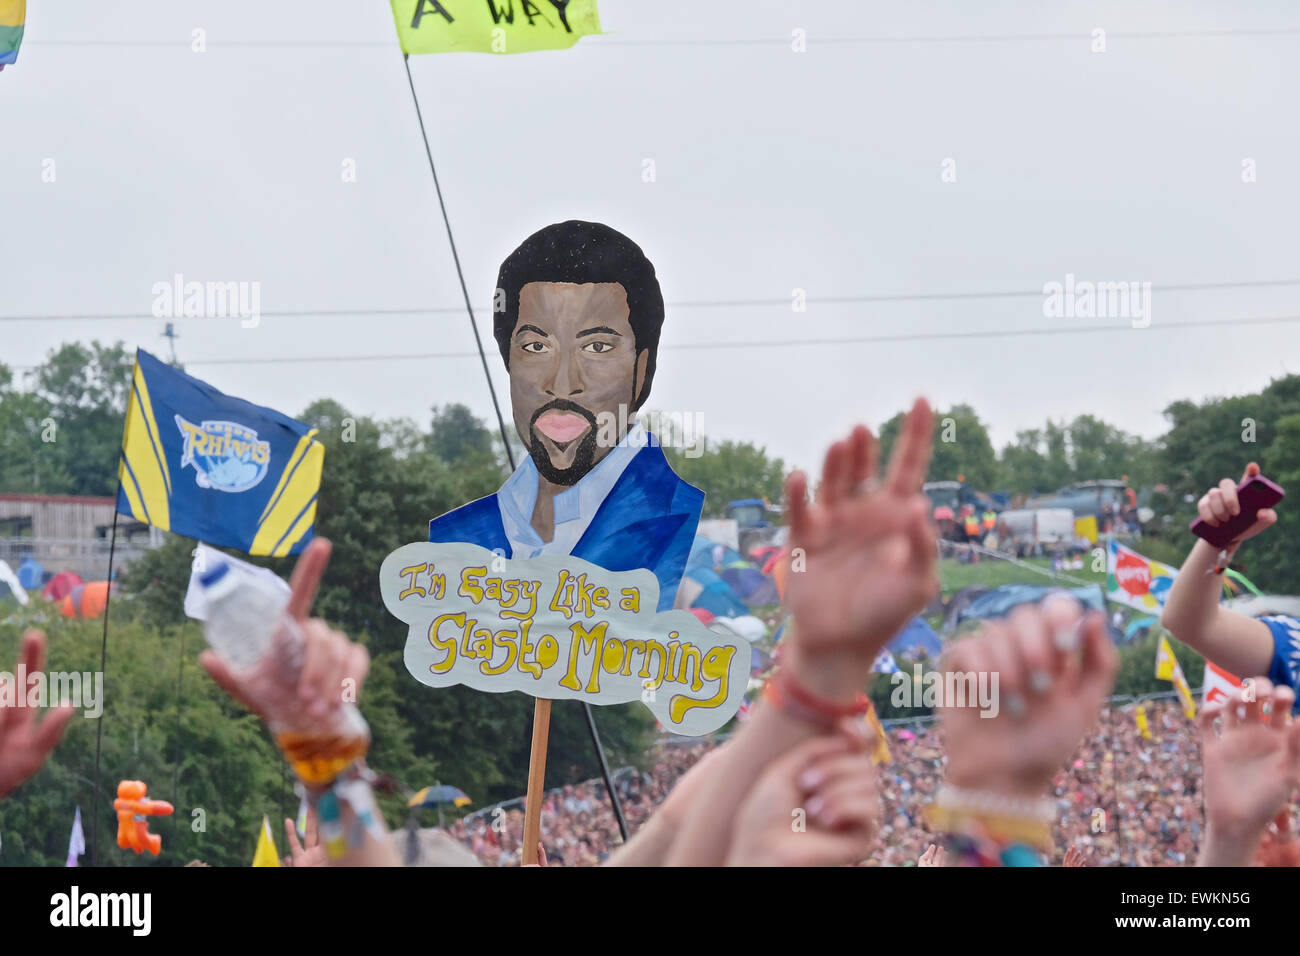 Glastonbury Festival, Somerset, UK. 28 June 2015. The crowd shows its appreciation as Lionel Richie performs live during his first ever British festival appearance in the traditional Sunday 'legend' spot  on the Pyramid Stage on Sunday at the 2015 Glastonbury Festival. Credit:  Tom Corban/Alamy Live News Stock Photo